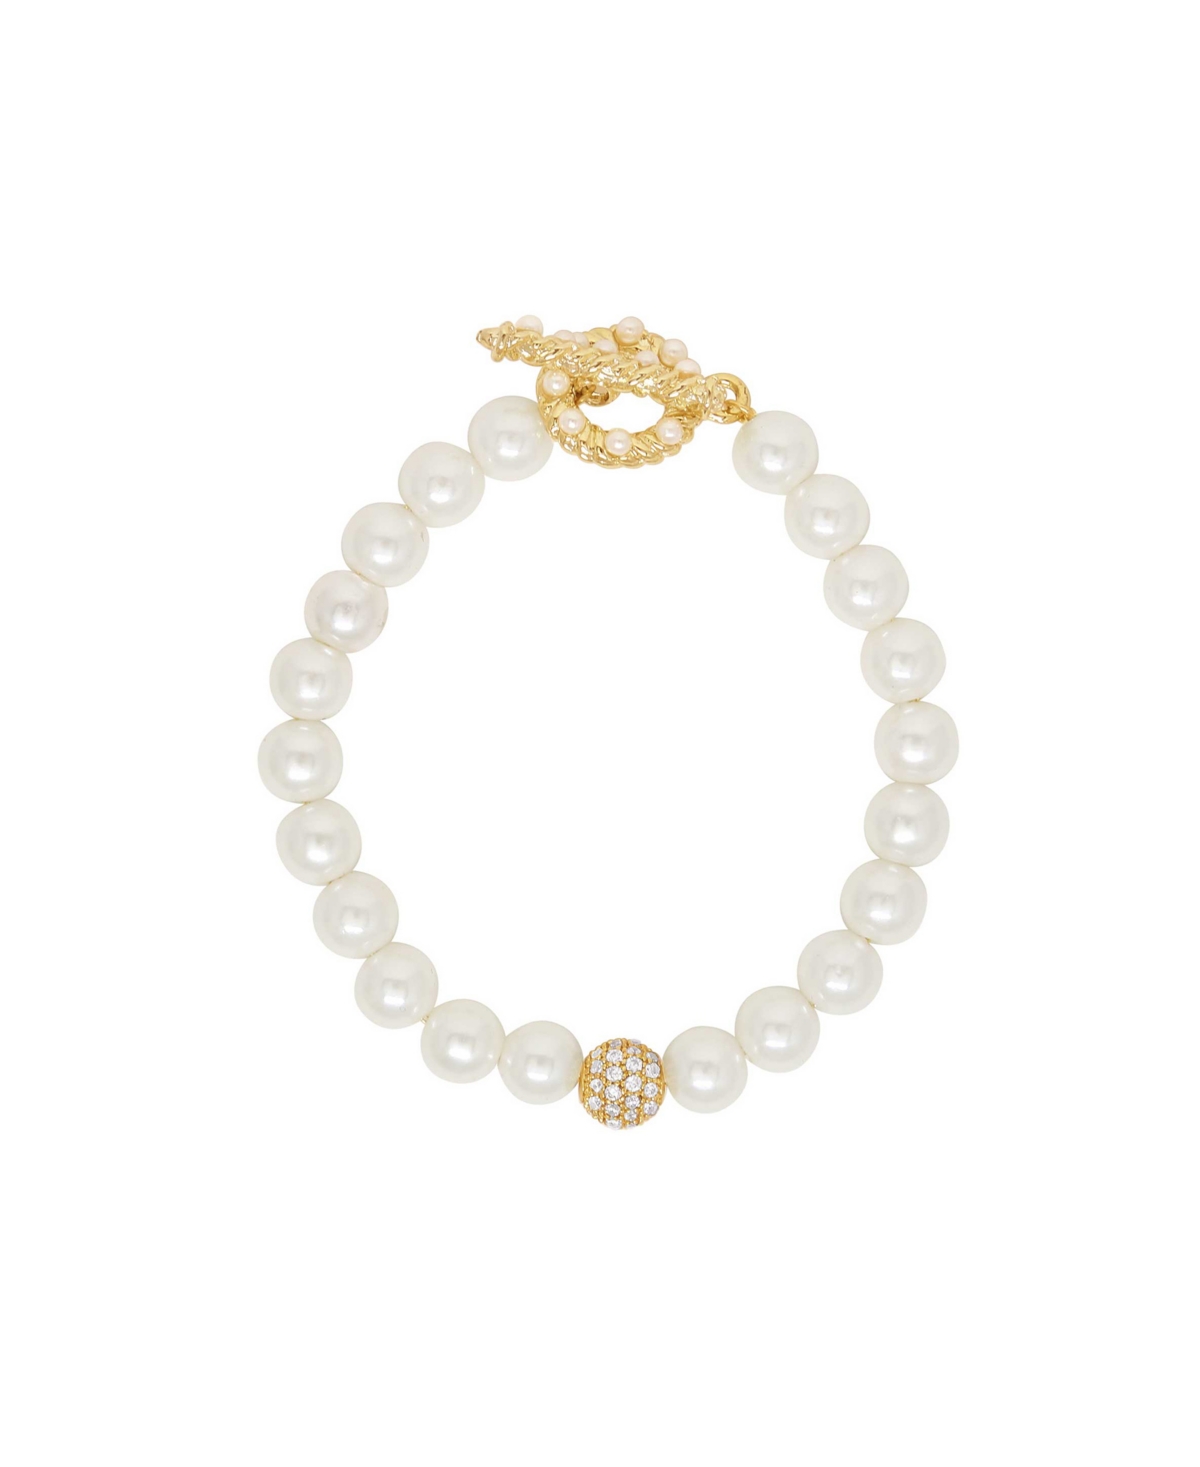 Pearl Beaded Toggle Bracelet - Gold Plated